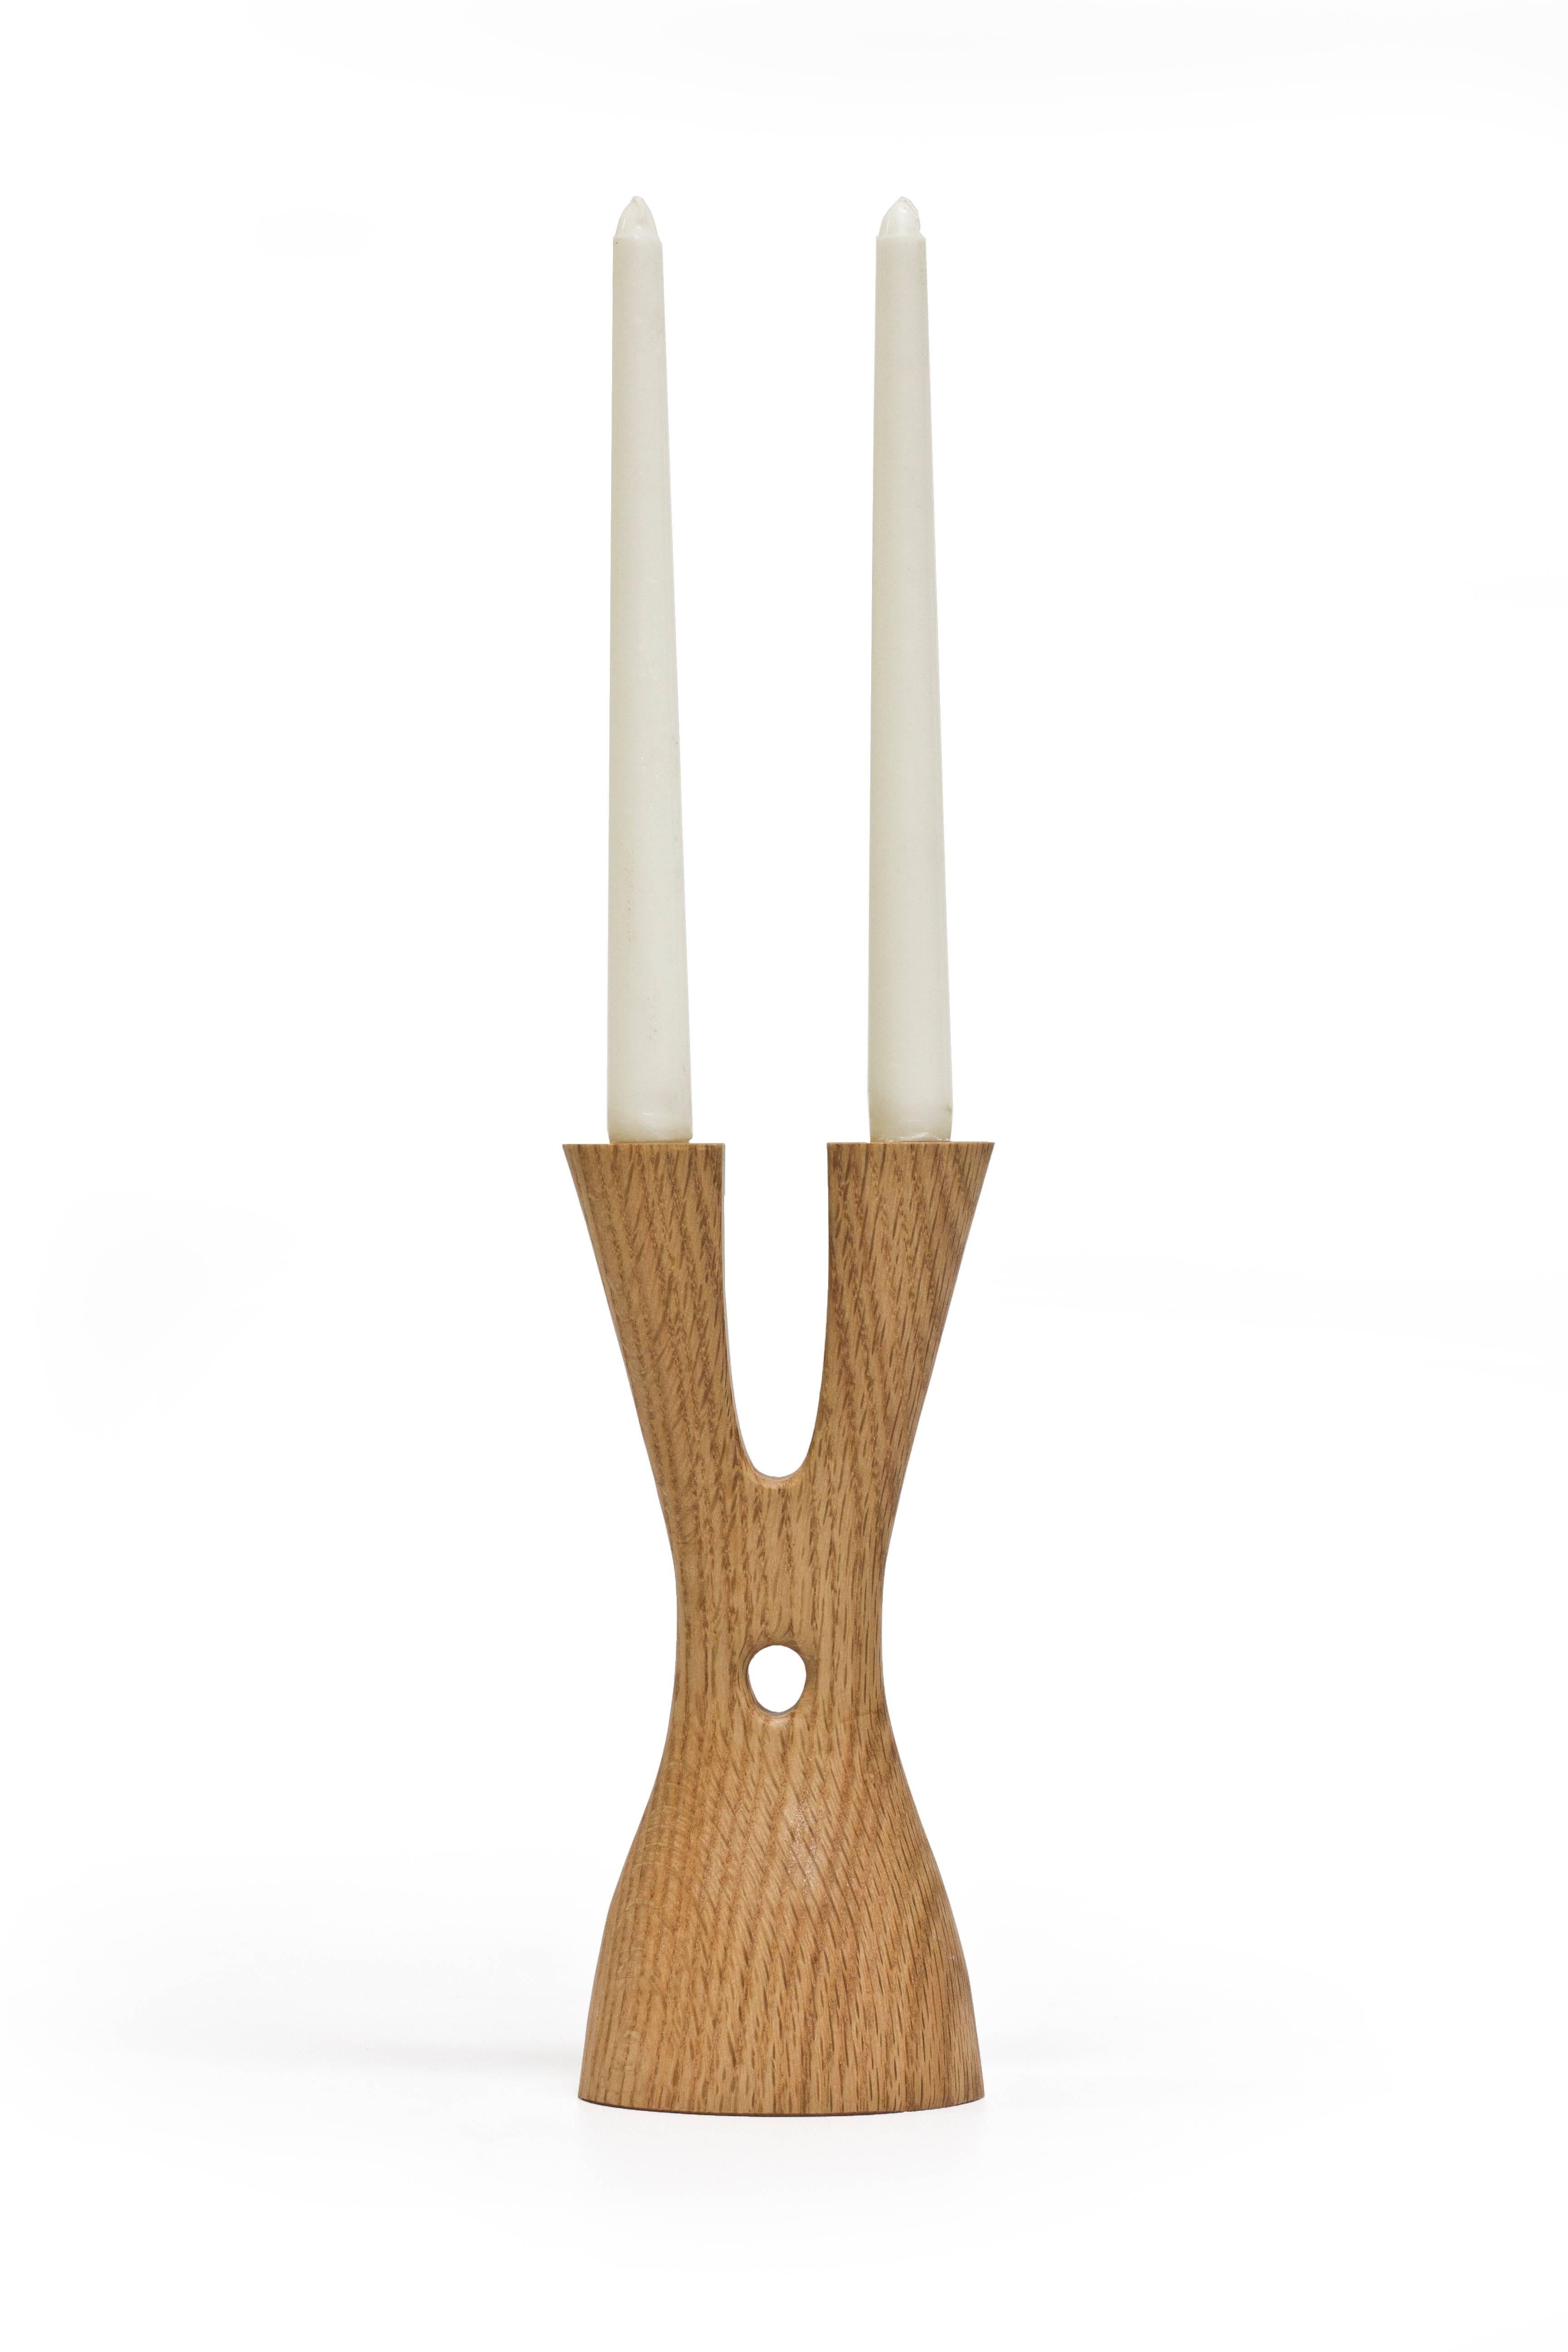 The Mastodon by Noah Norton for Wooda powerfully lifts and holds two tapers. Inspired by the natural world and crafted in beautiful walnut, ash, and oak, Mastodon is designed to brighten a room and encourage conversation.

About the designer: Noah